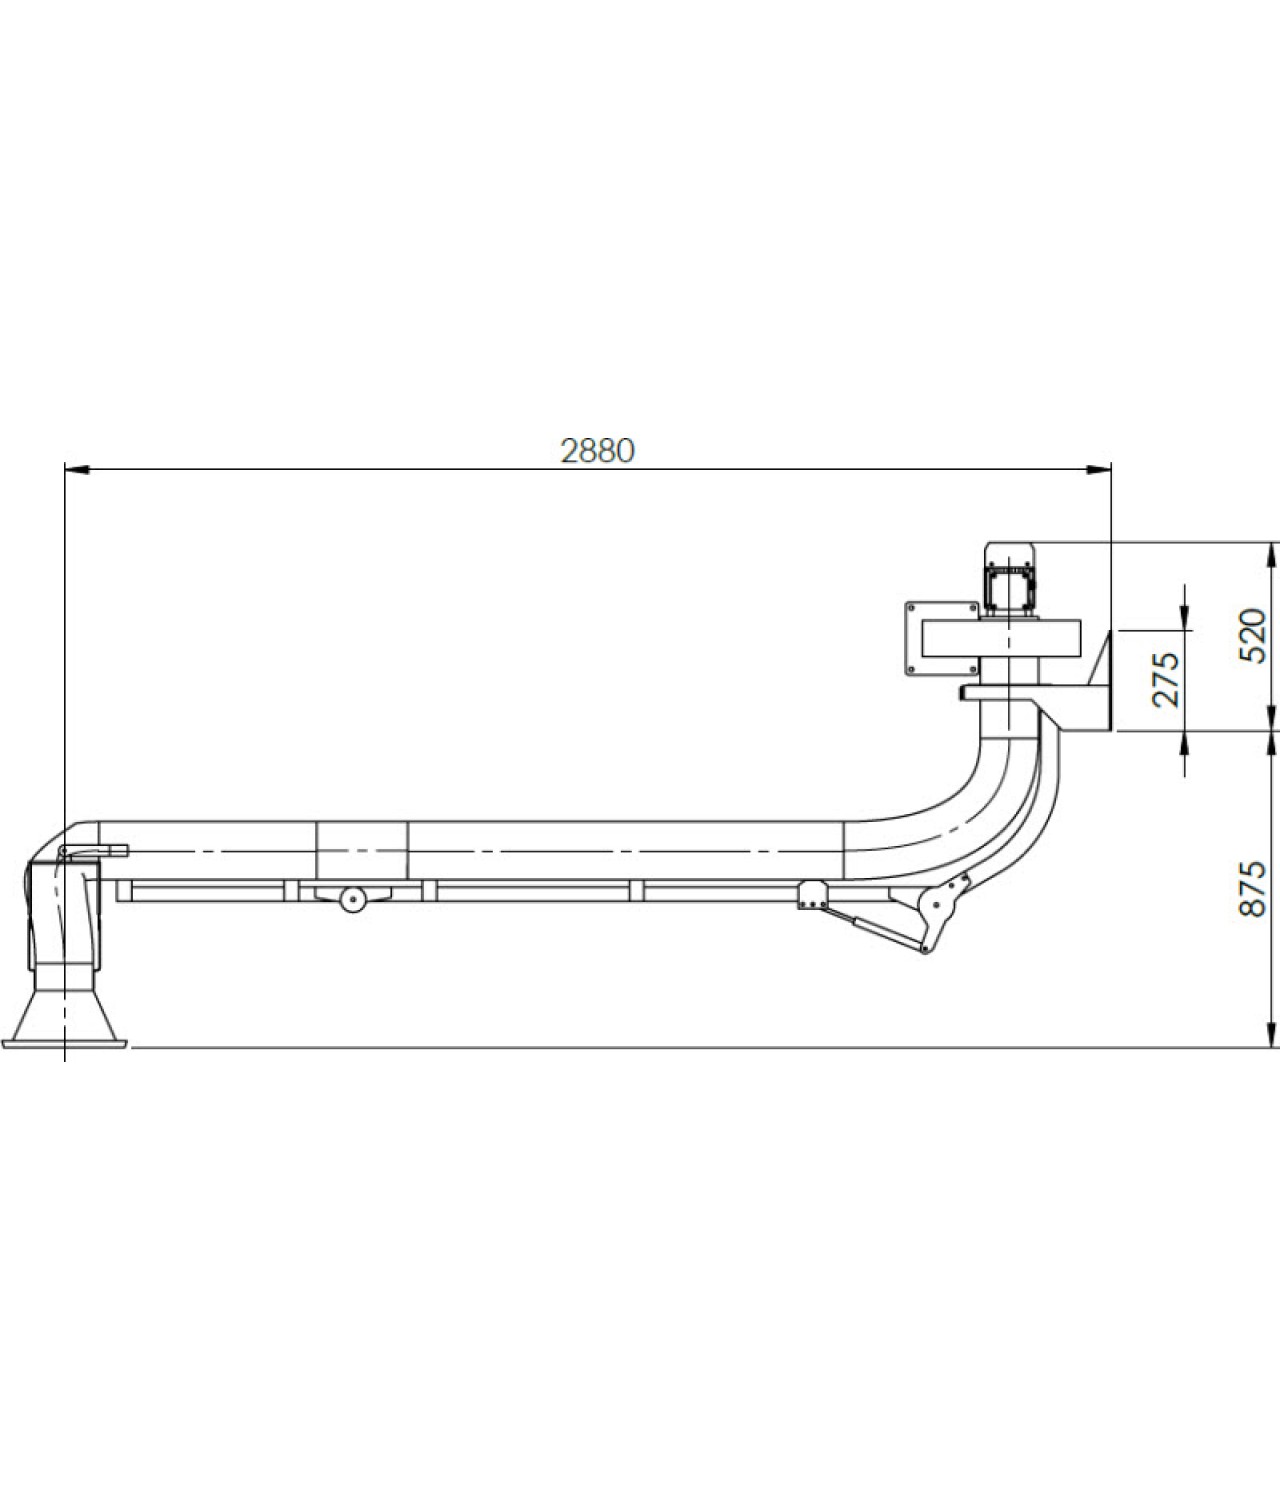 Welding fume extraction system SDNS-055 ≤1000 m³/h - drawing No.2